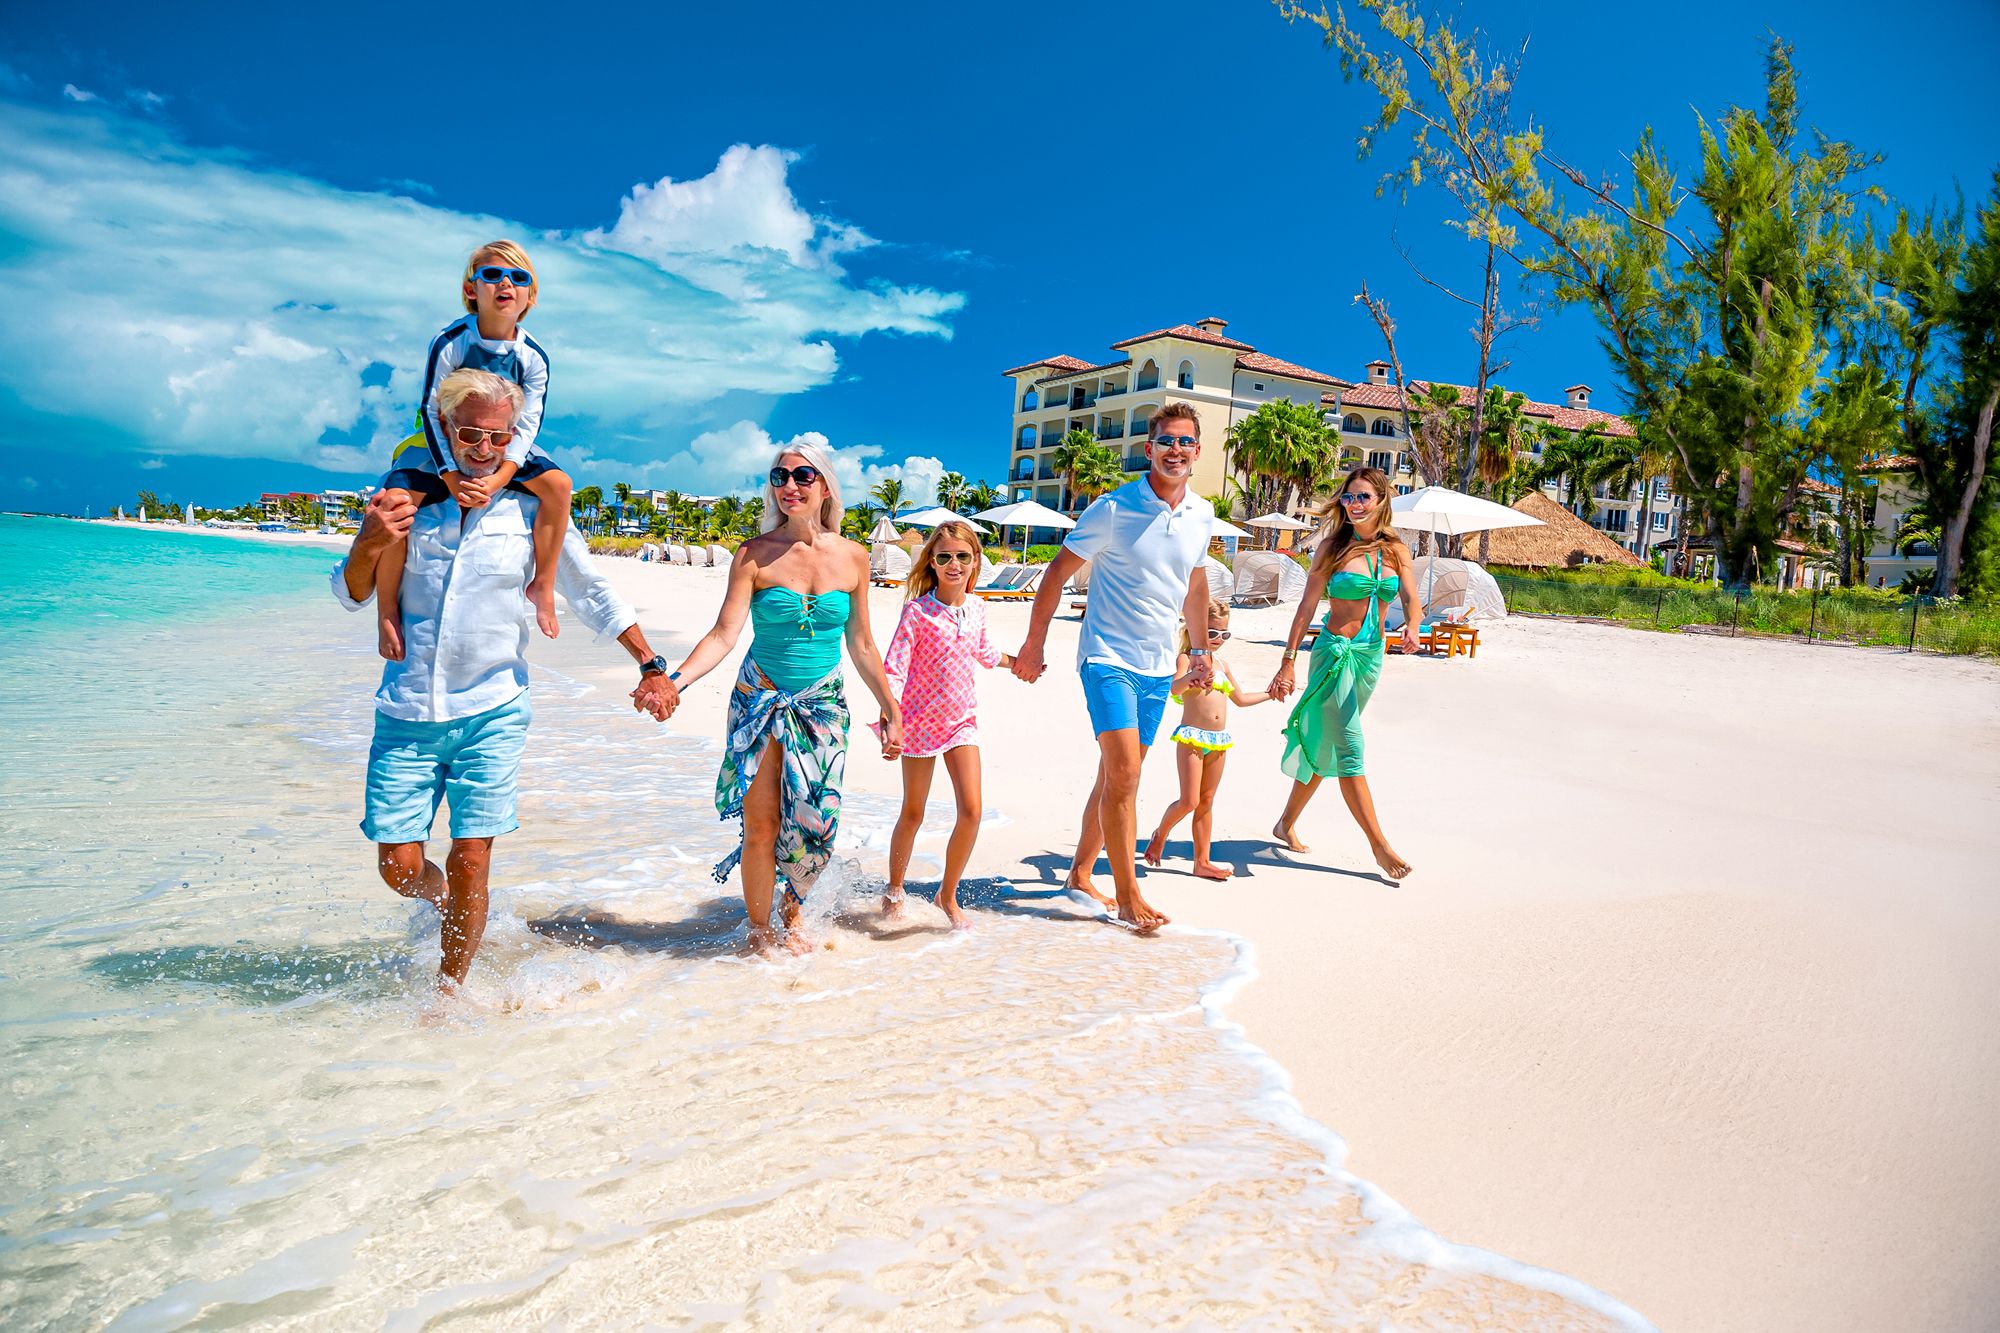 20 Family Vacation Ideas In The US - Where to Go for the Perfect Trip - Top Travel Gram